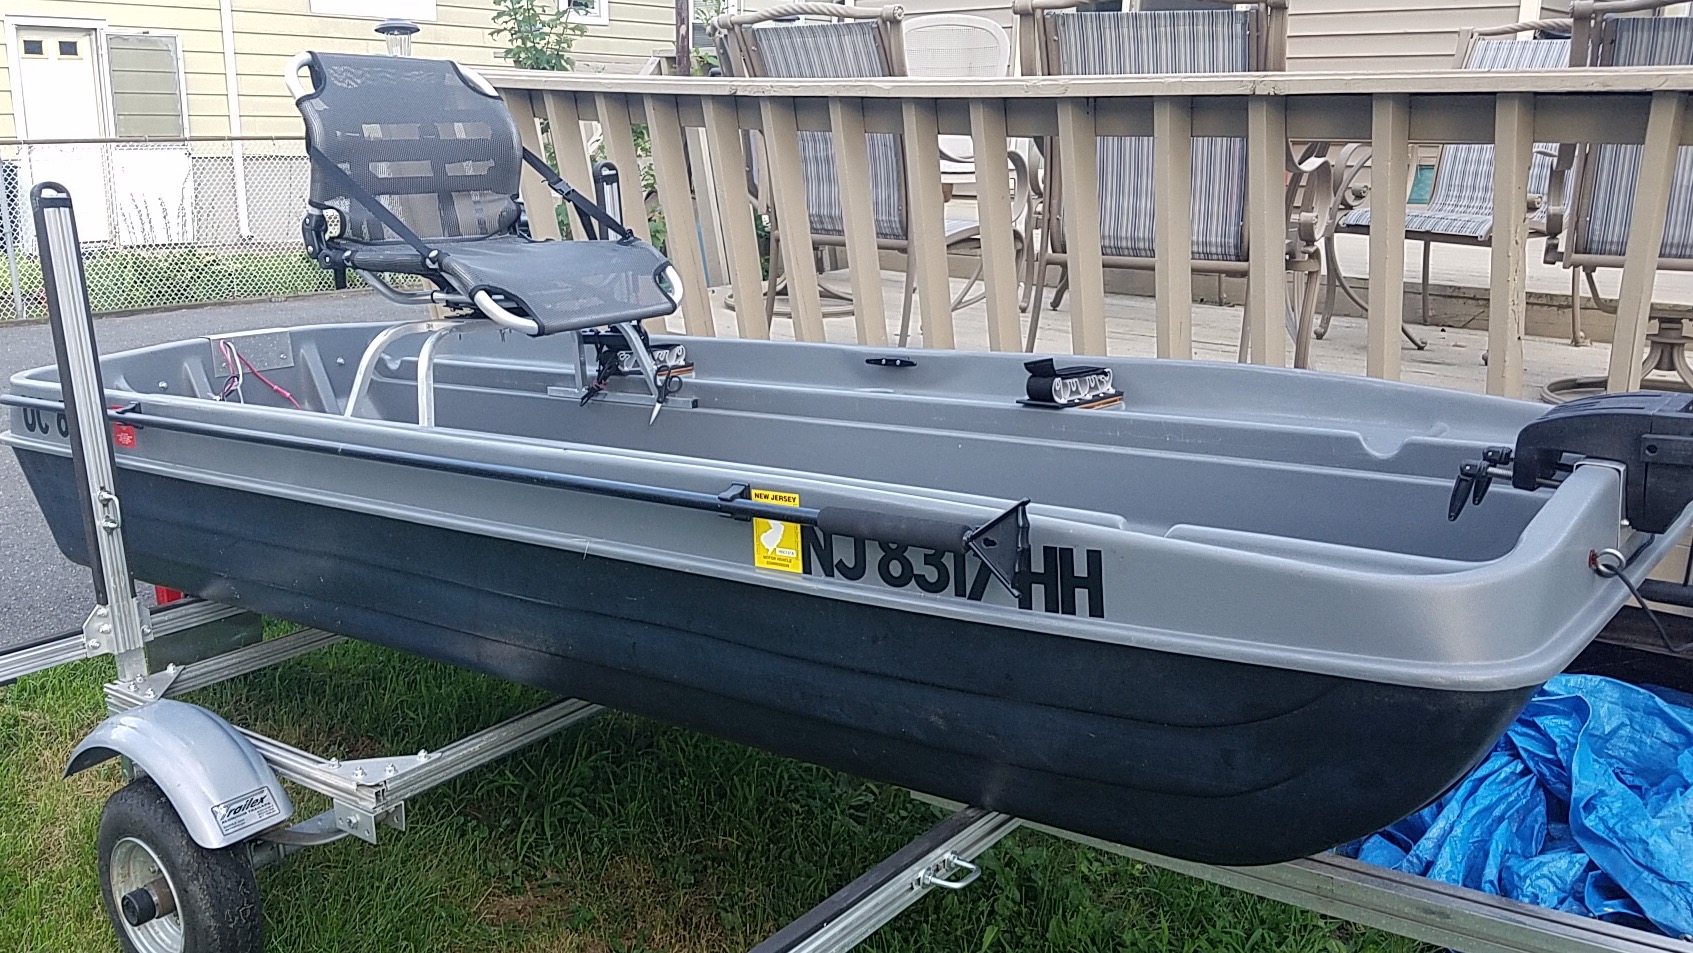 Any Pelican Bass Raider Owners Out There? - Page 108 - Bass Boats